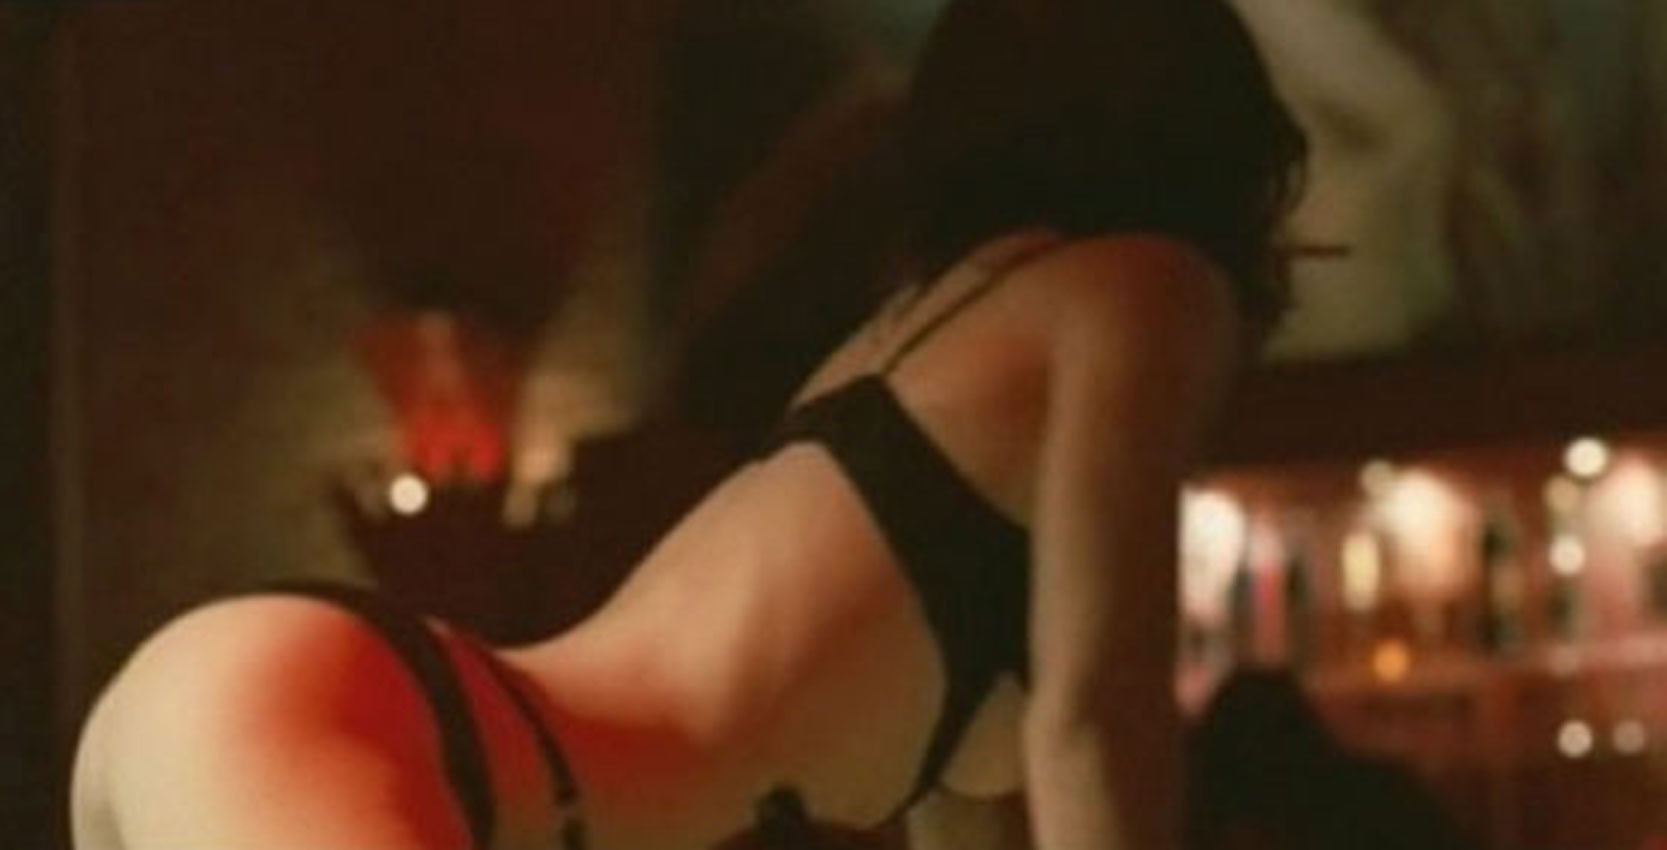 Jessica Biel exposing lovely tits while stripping #75314937